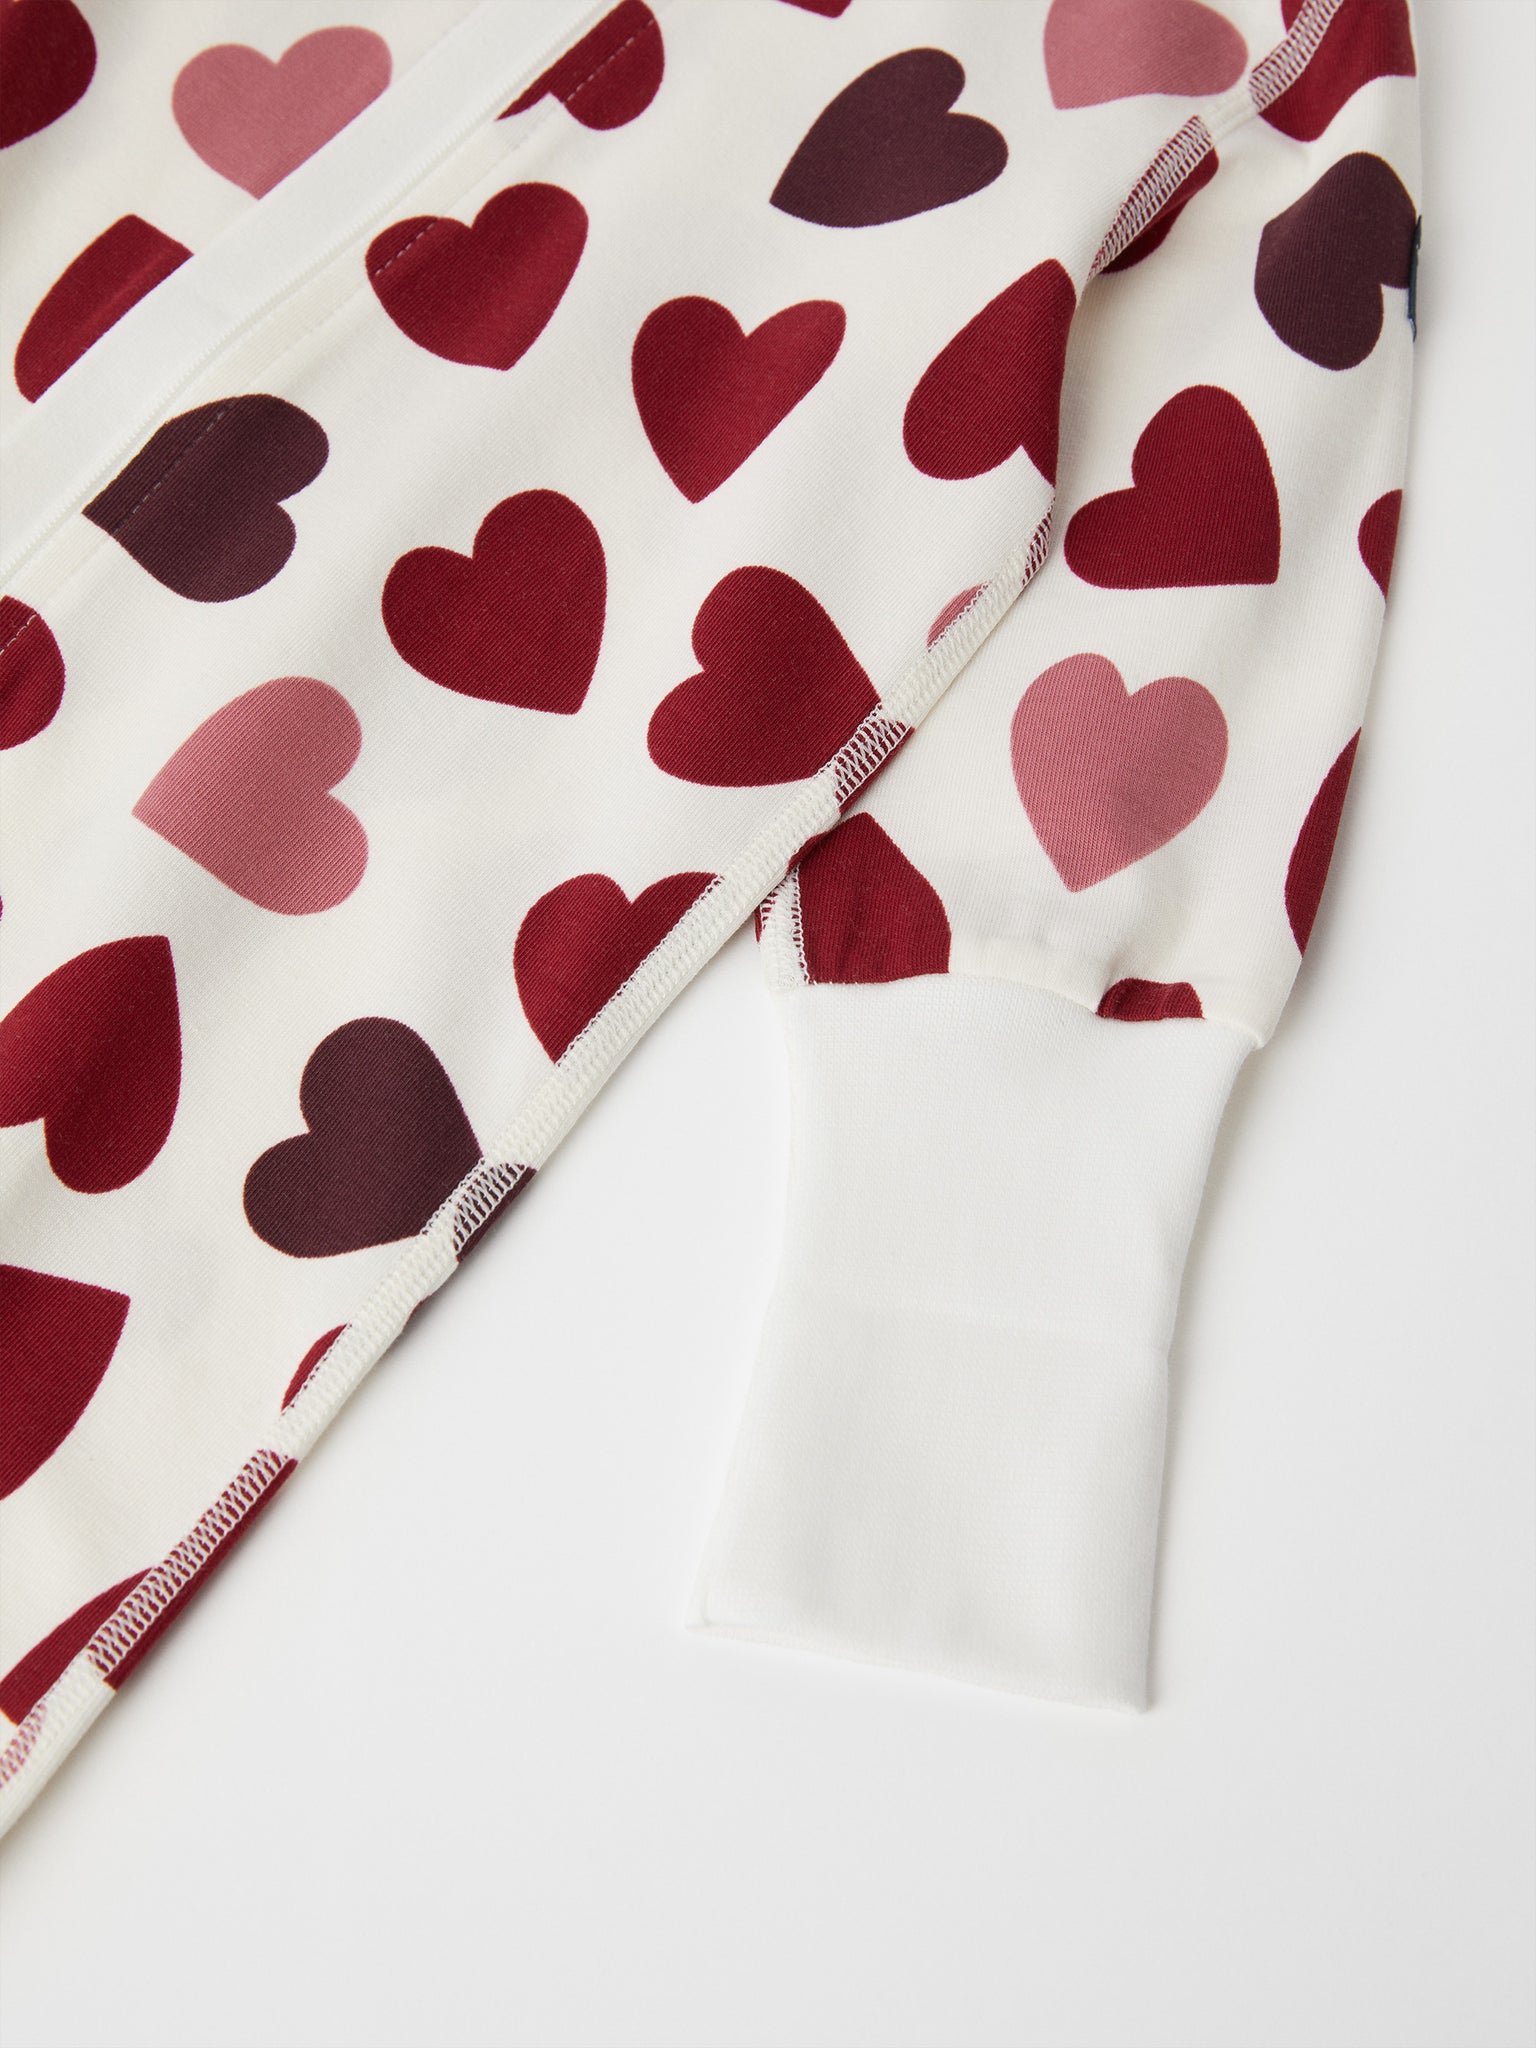 Heart Print Cotton Baby Sleepsuit from the Polarn O. Pyret baby collection. The best ethical baby clothes